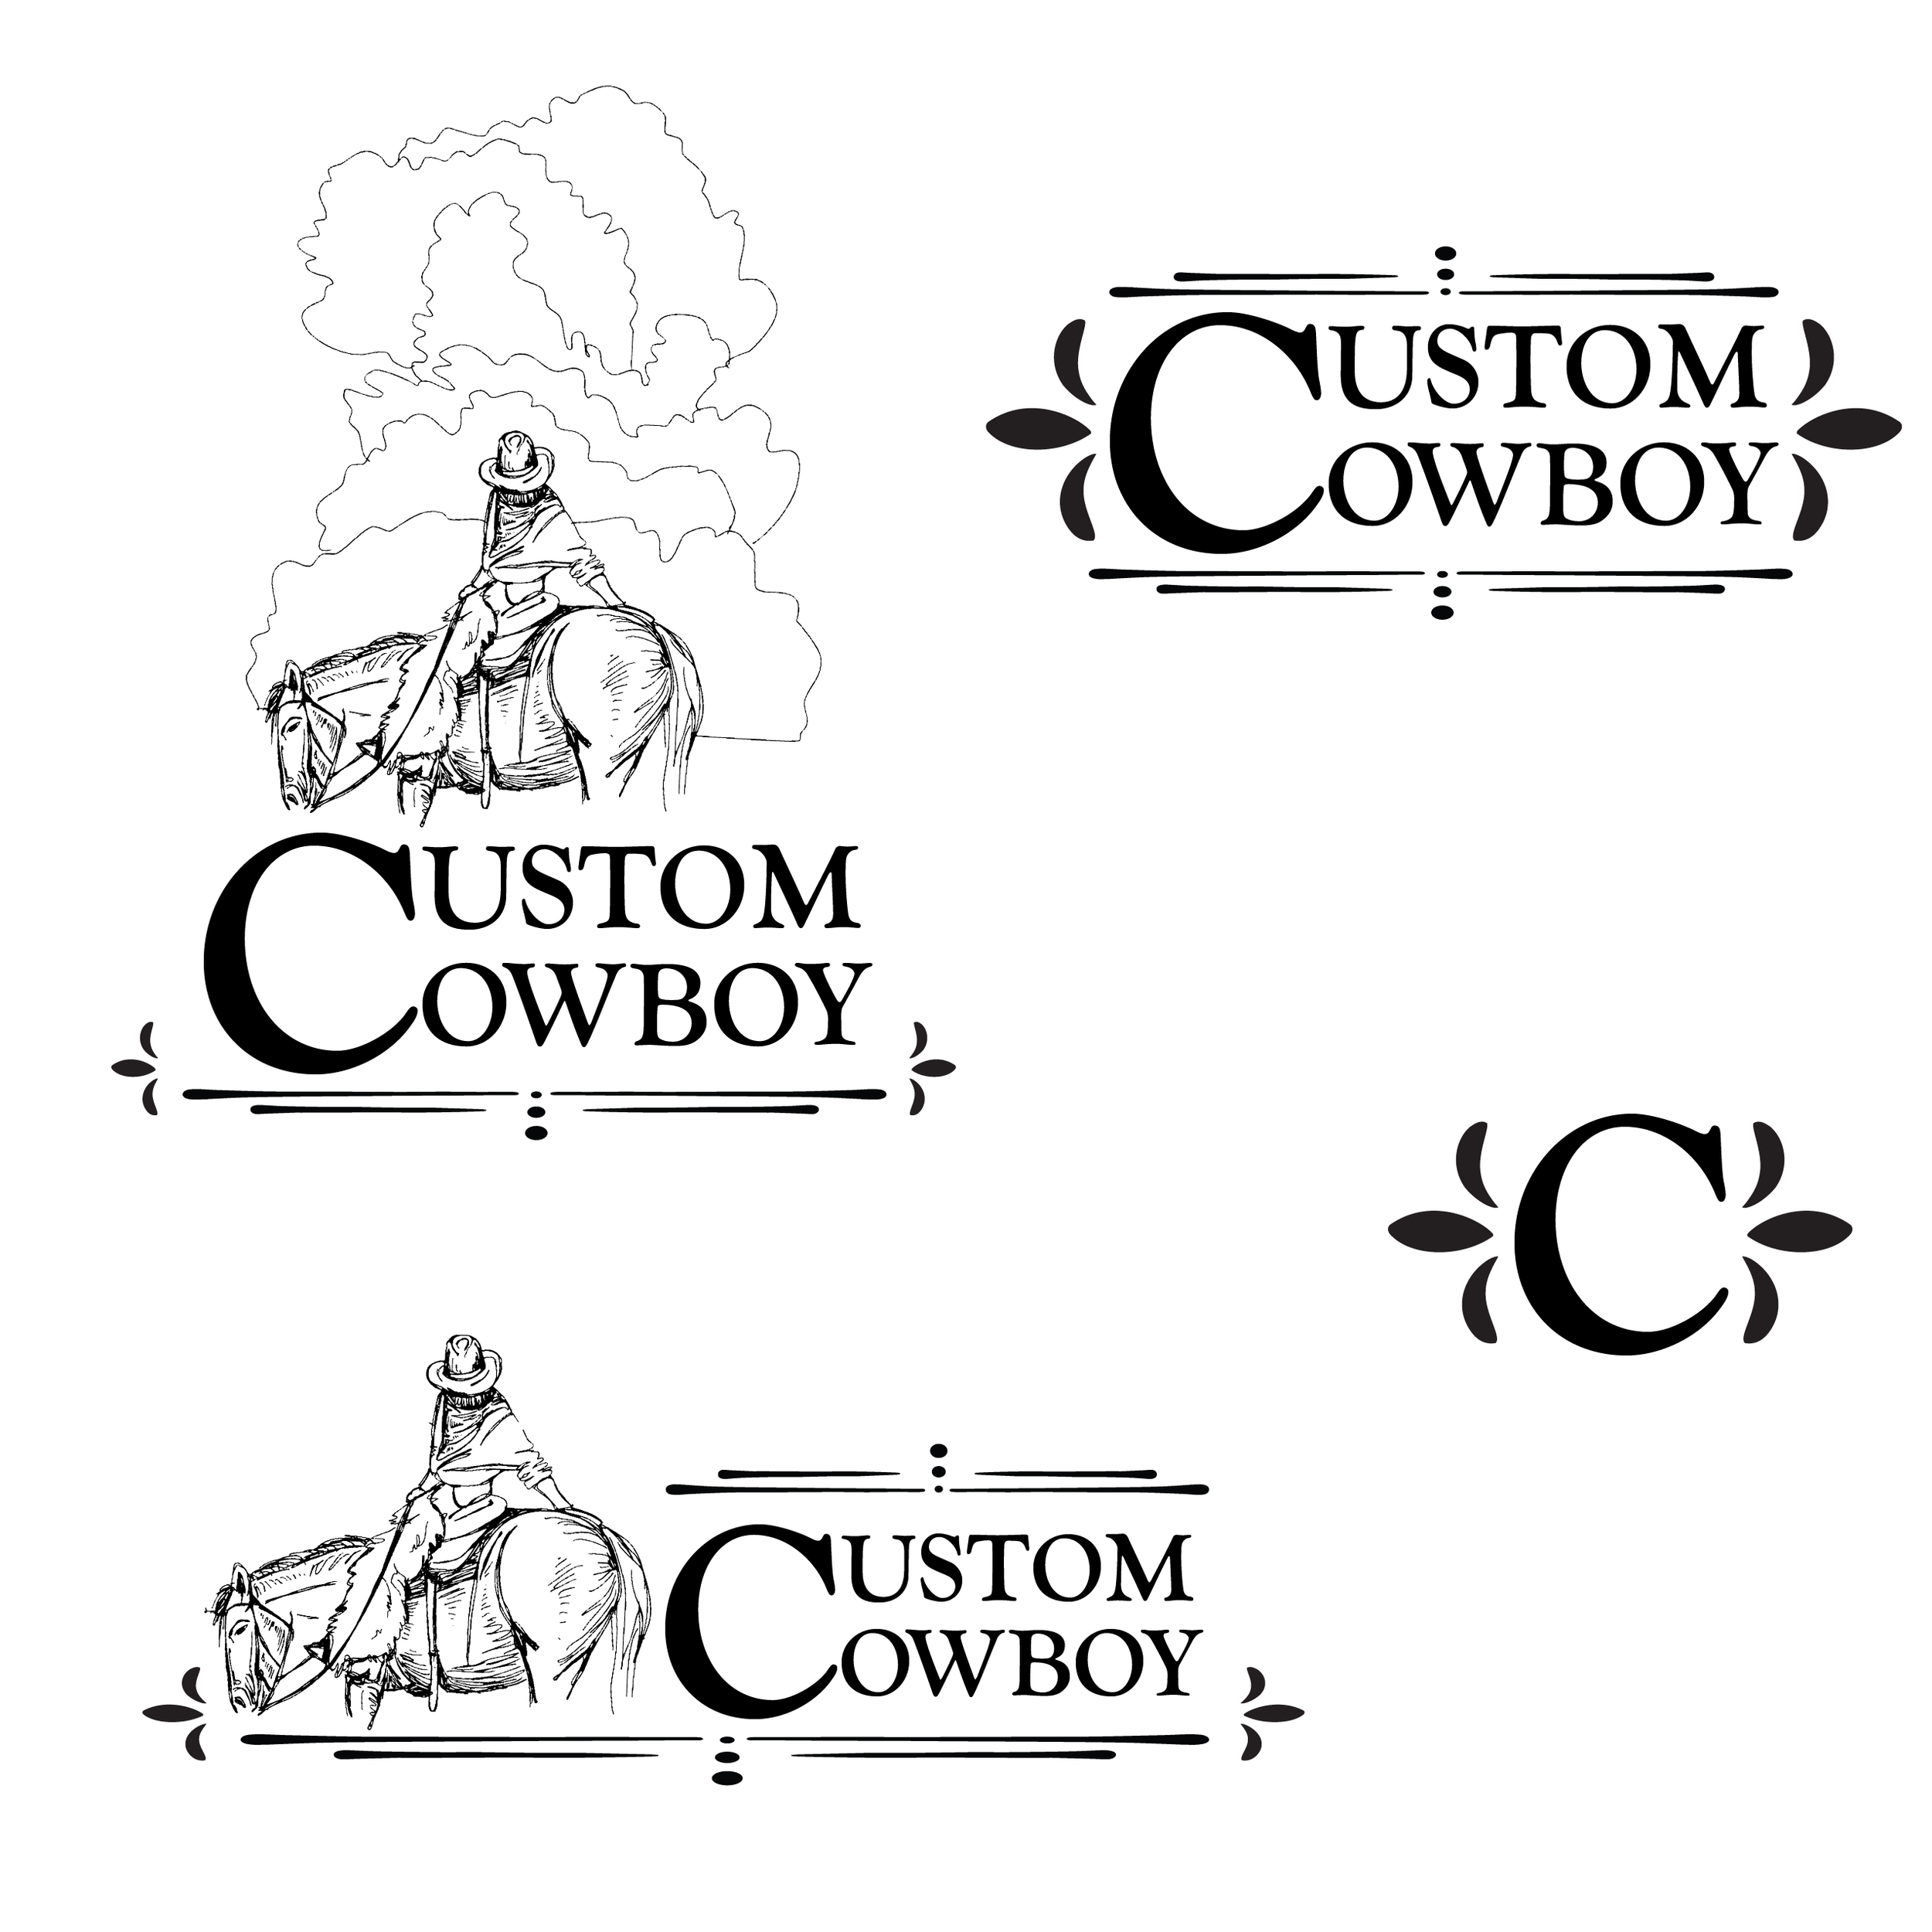 cc clouds draft_Goudy-01-01.png